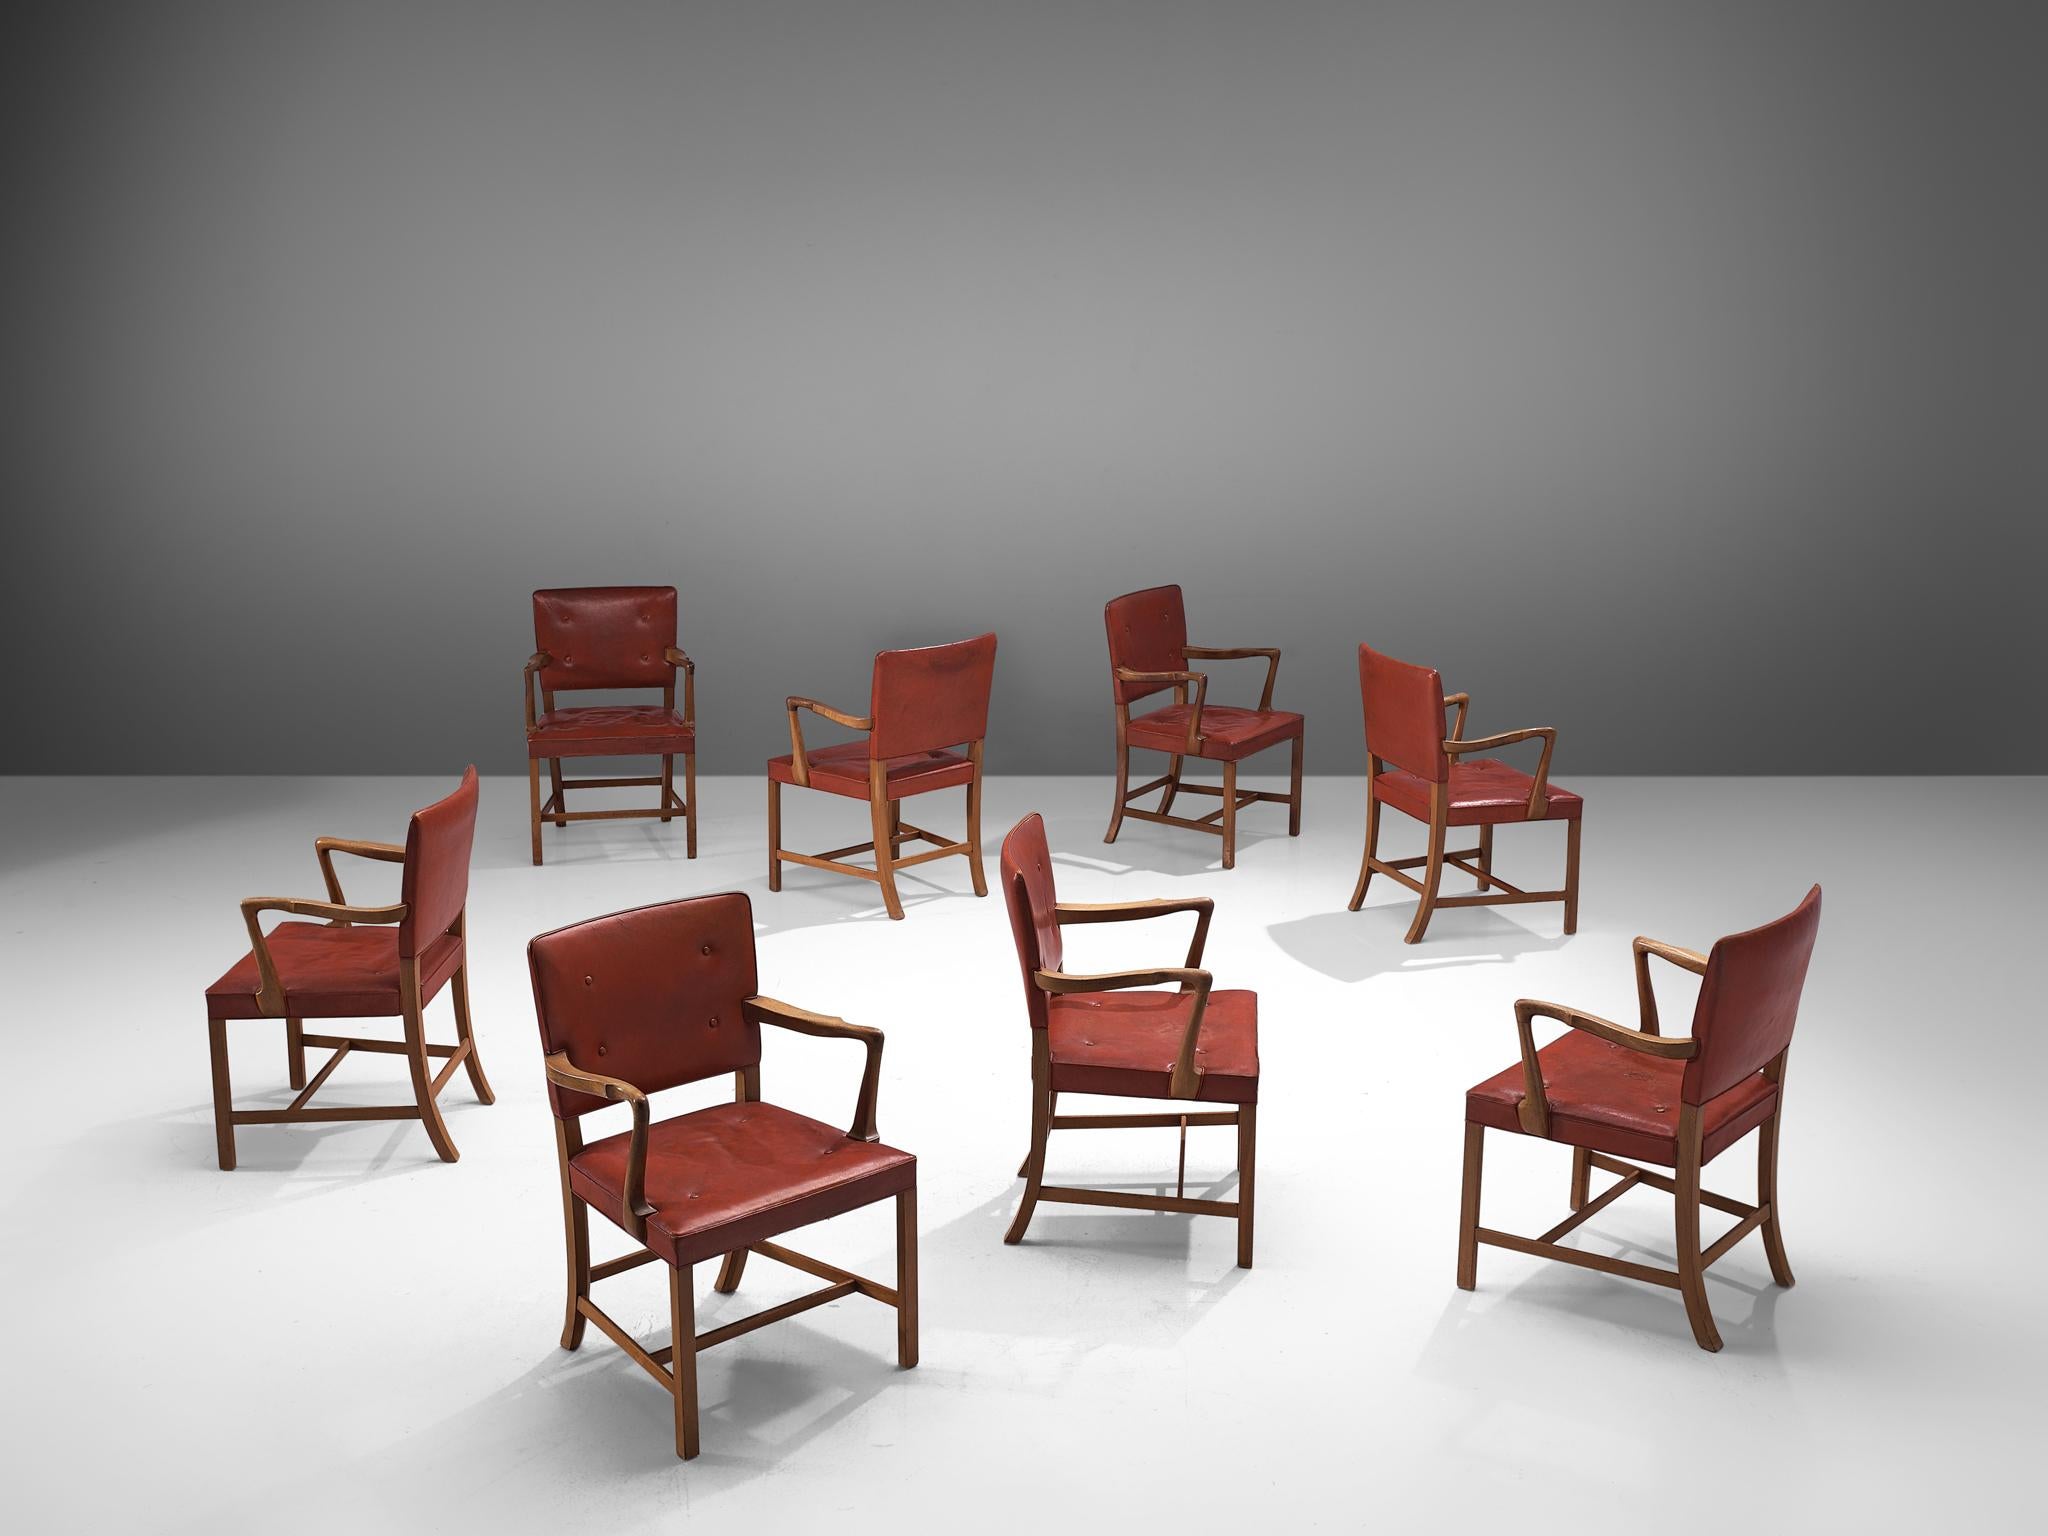 Scandinavian Modern Set of 8 Armchairs in Original Red Leather by Ole Wanscher